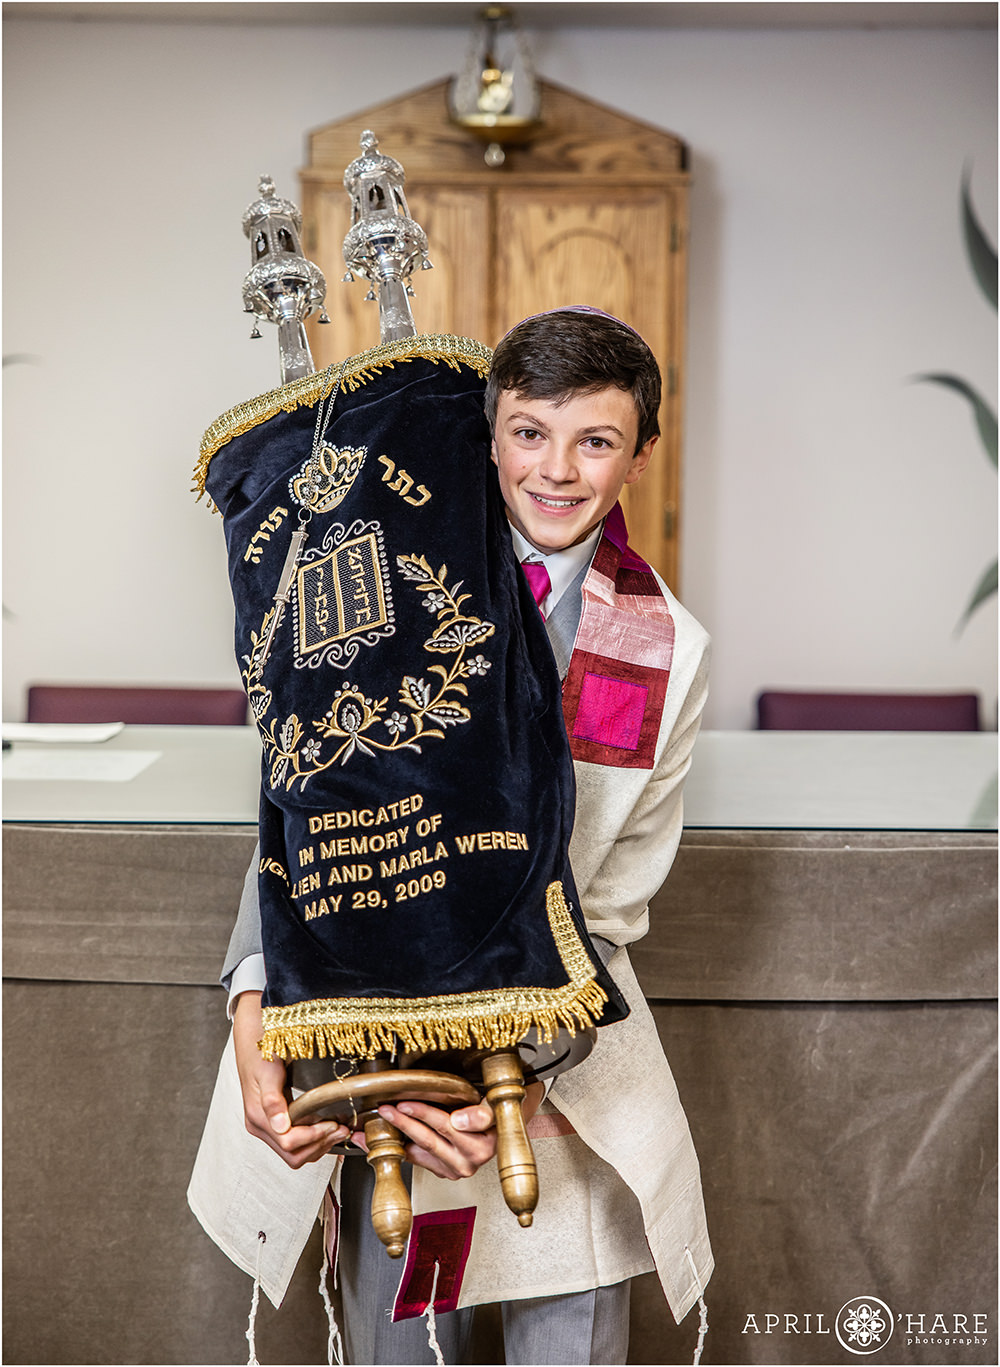 Bar Mitzvah boy holds torah for a posed photo prior to his service